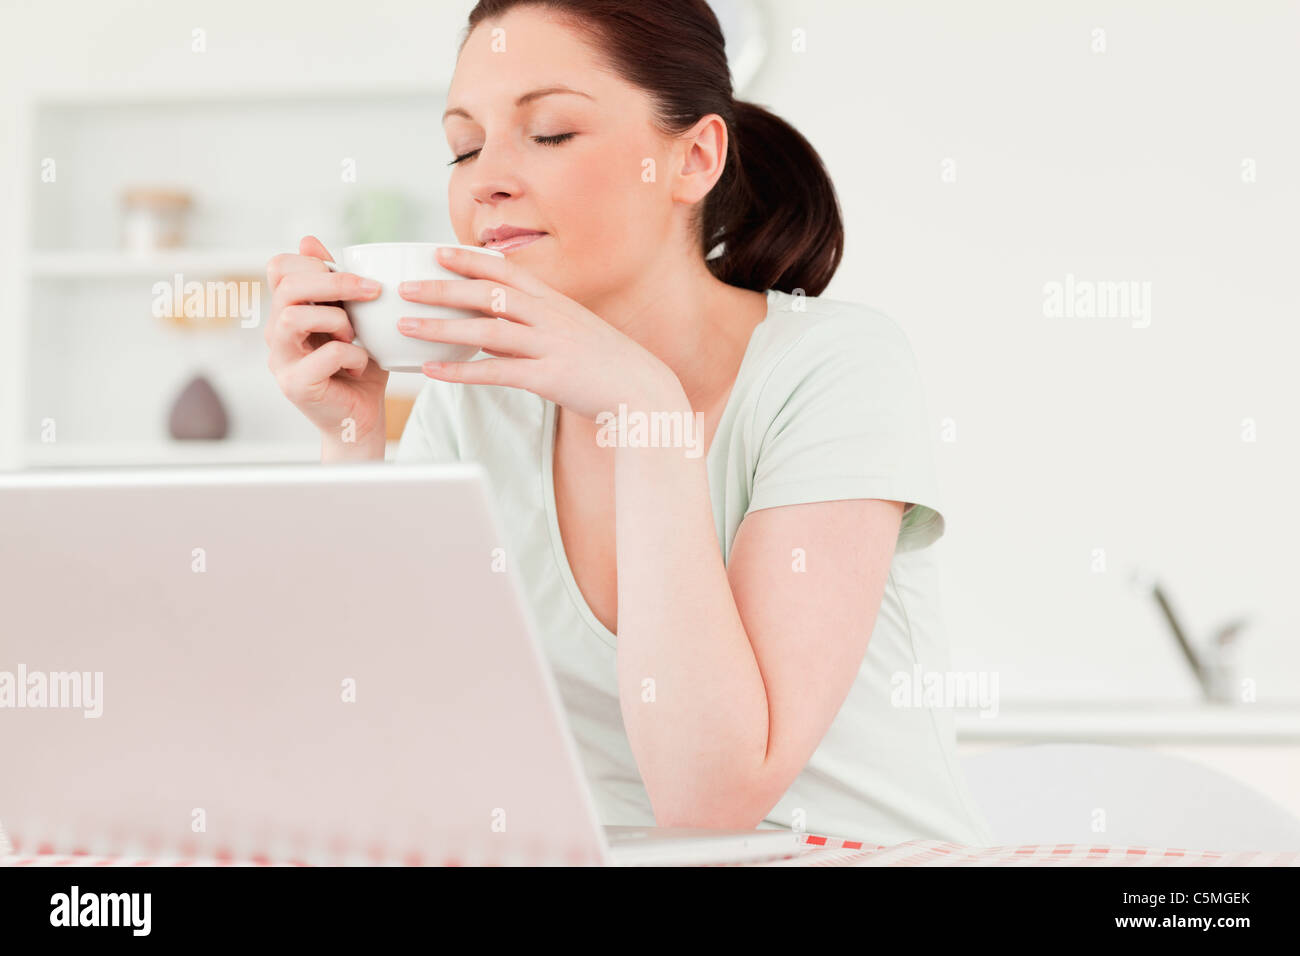 Good looking woman relaxing on her laptop while drinking a cup of tea Stock Photo